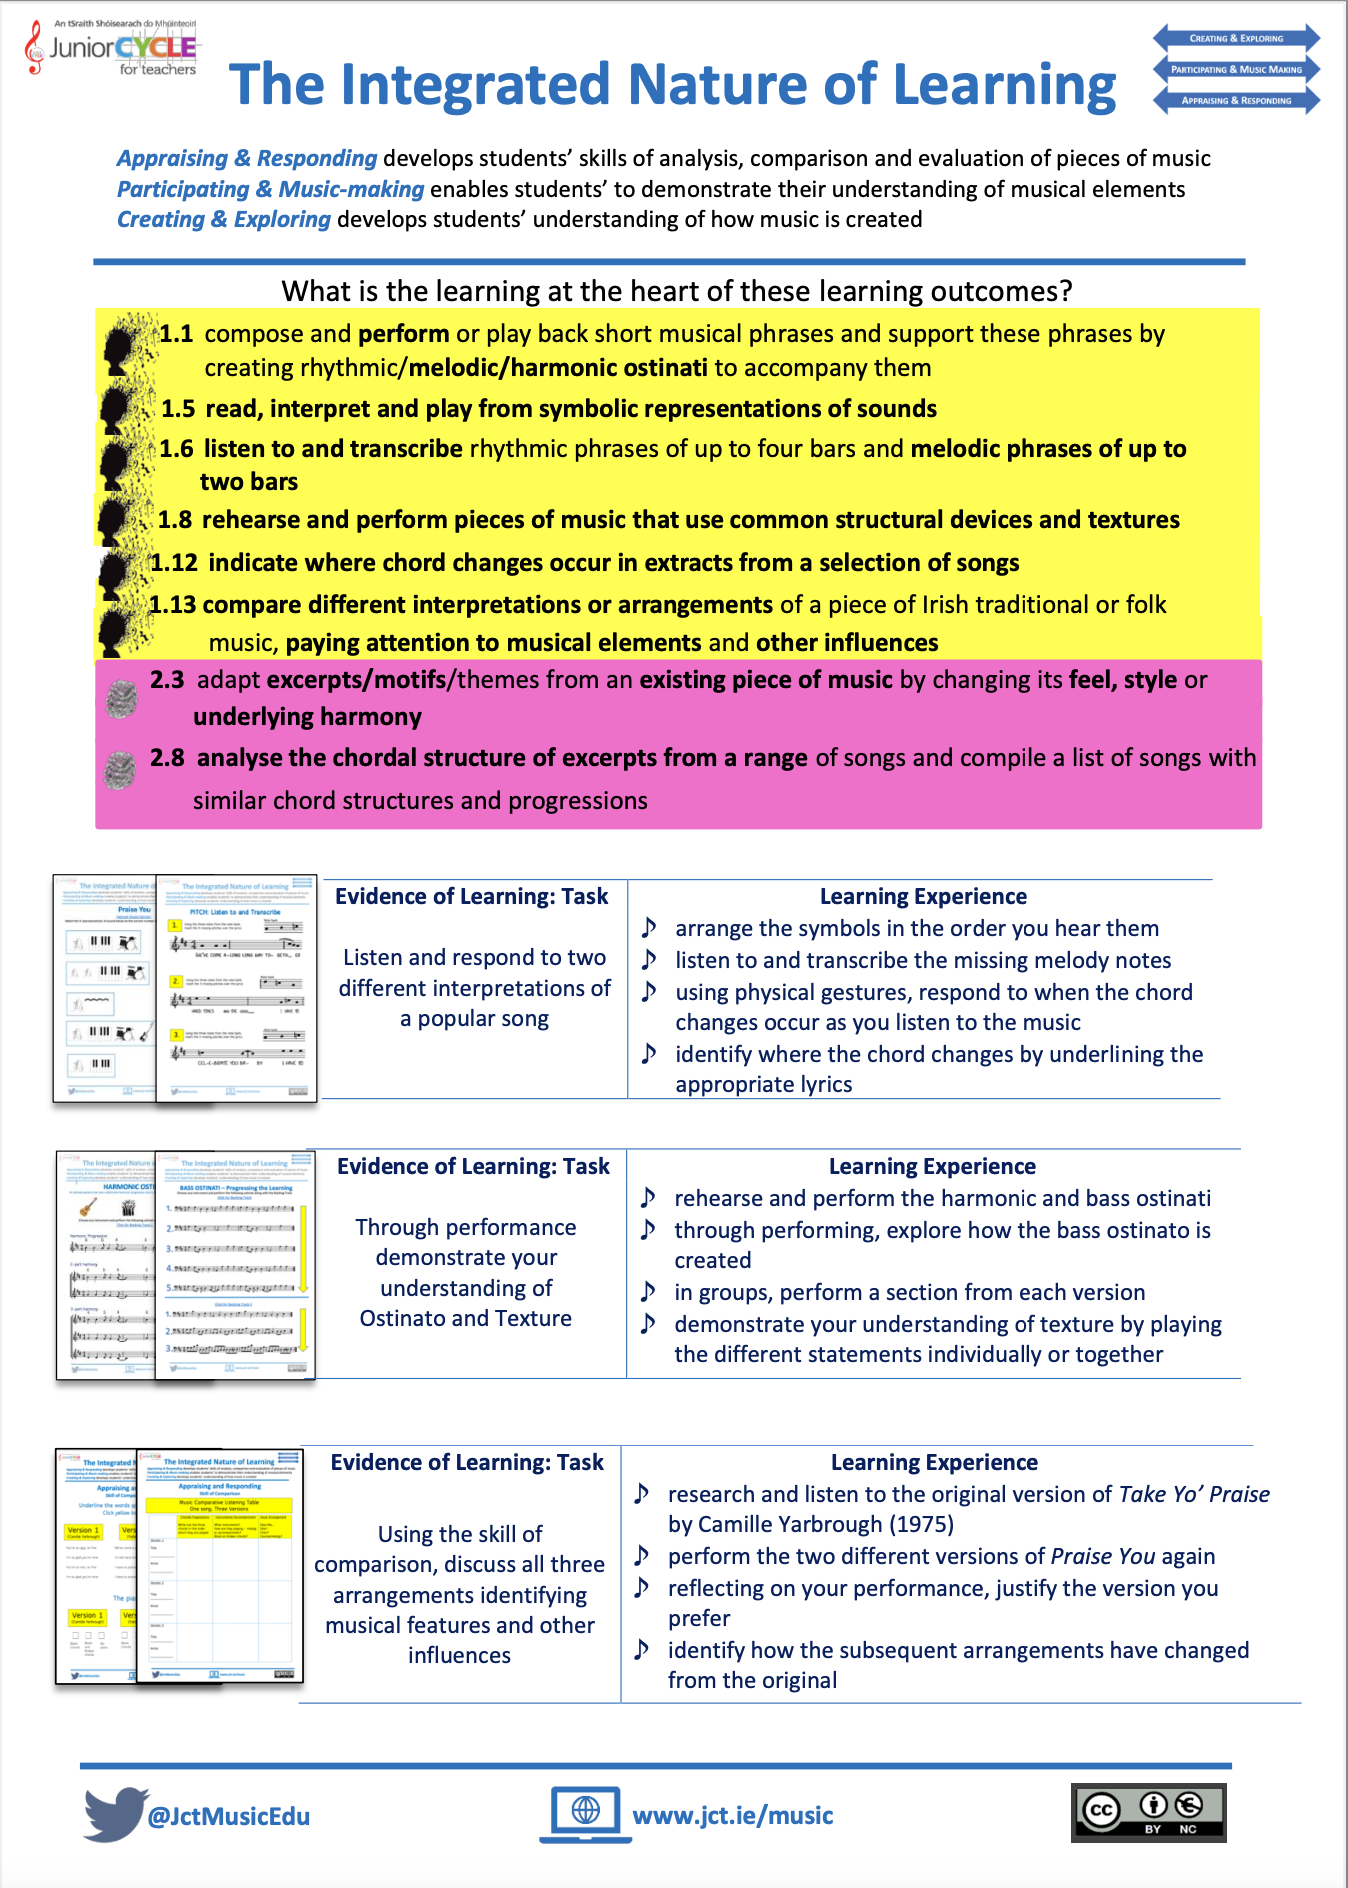 1. Planning Process in Action: The Integrated Nature of Learning (Praise You)